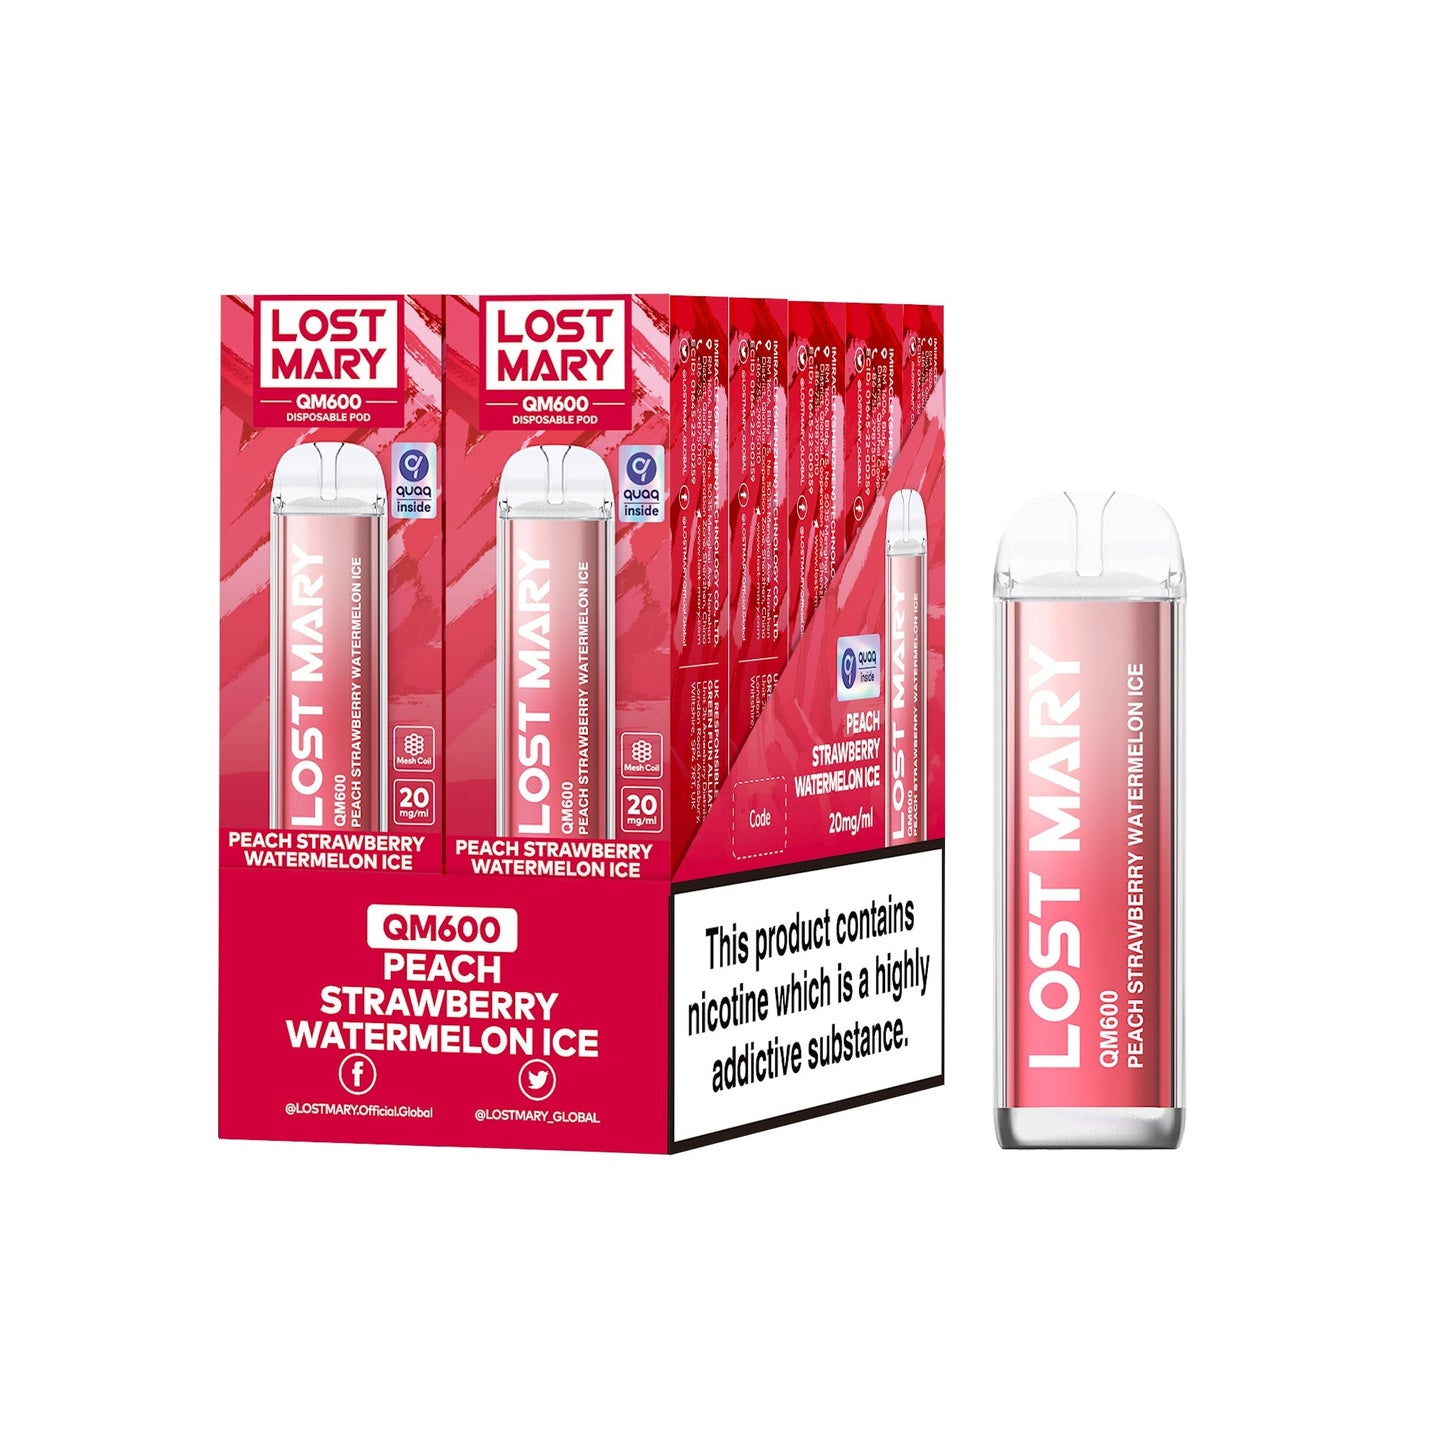 Lost Mary QM600 Disposable Vapes 10 pack